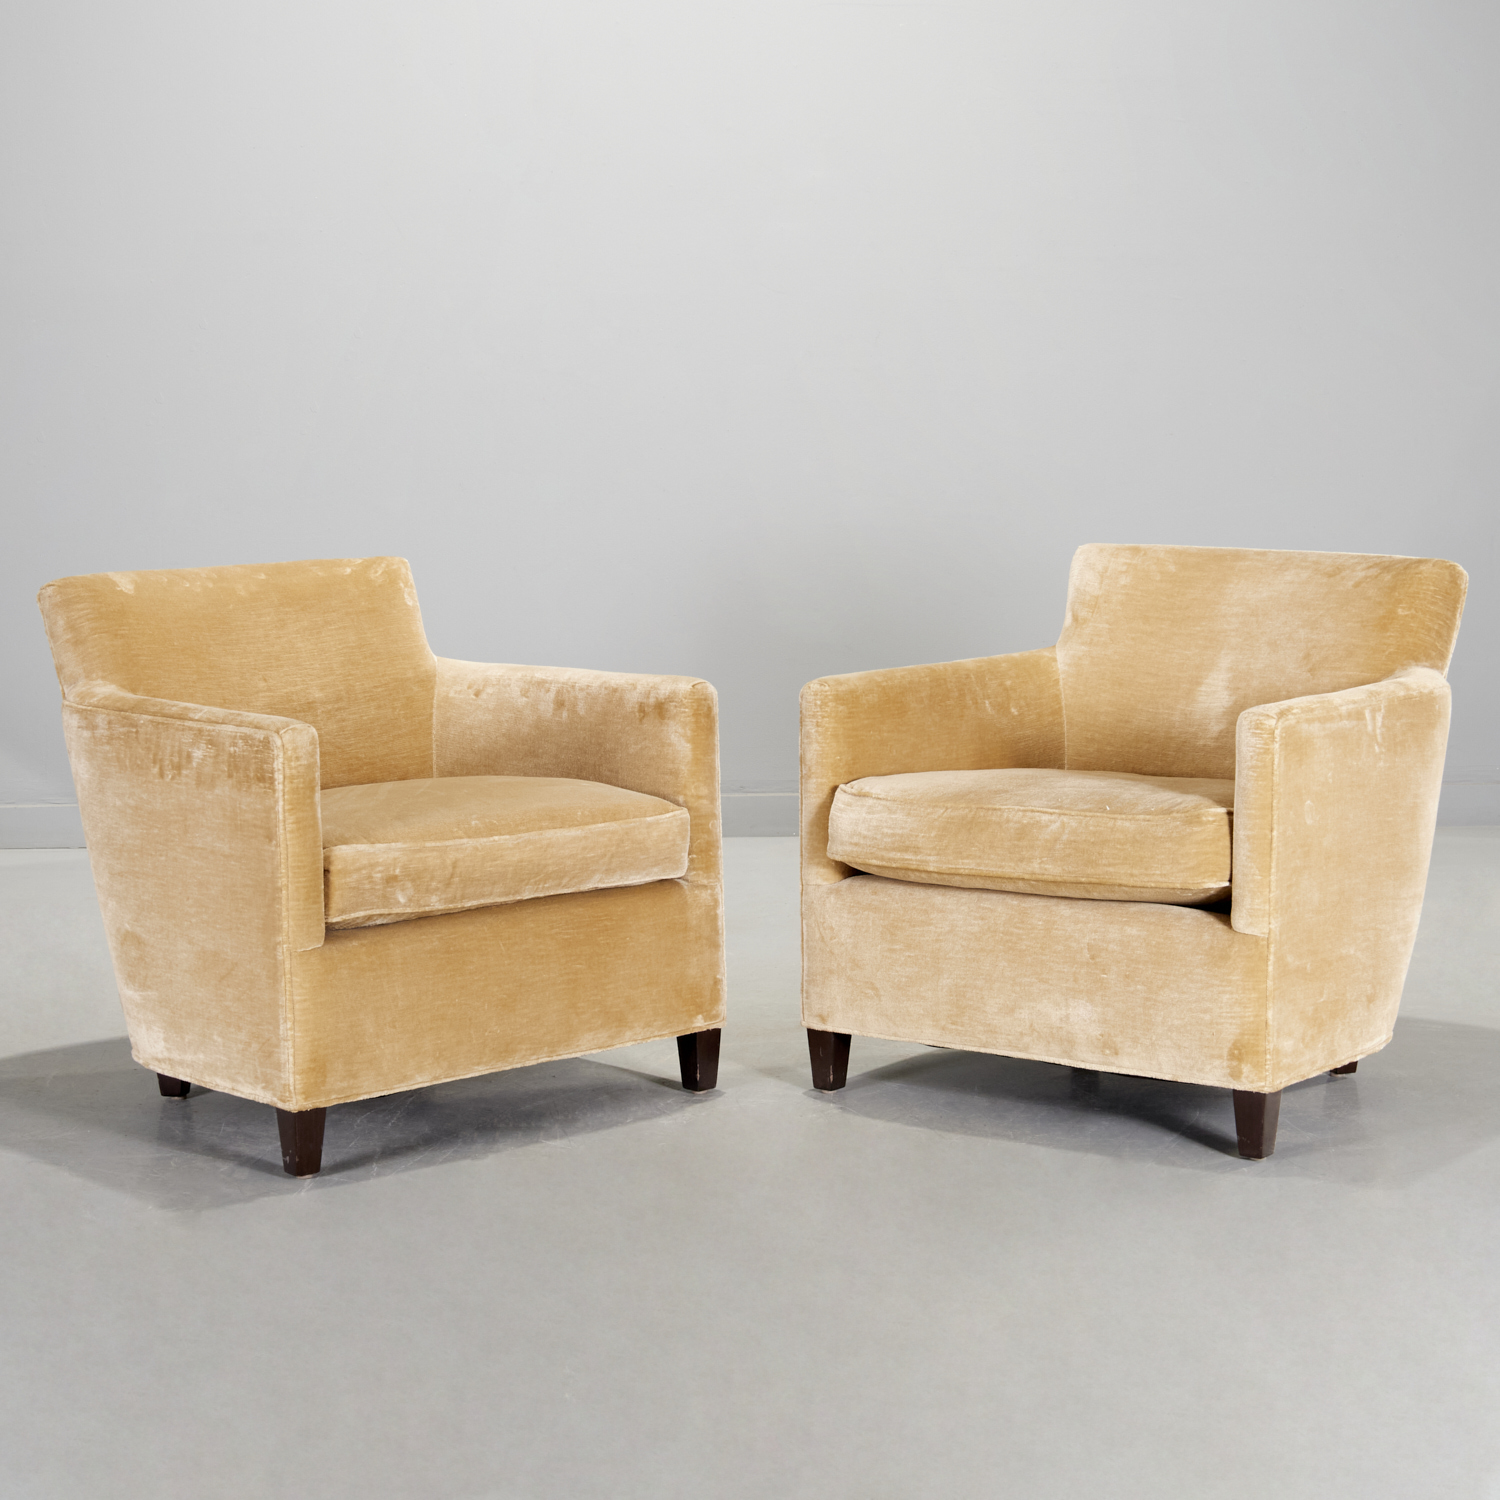 PAIR A RUDIN ART DECO STYLE LOUNGE 30bf47